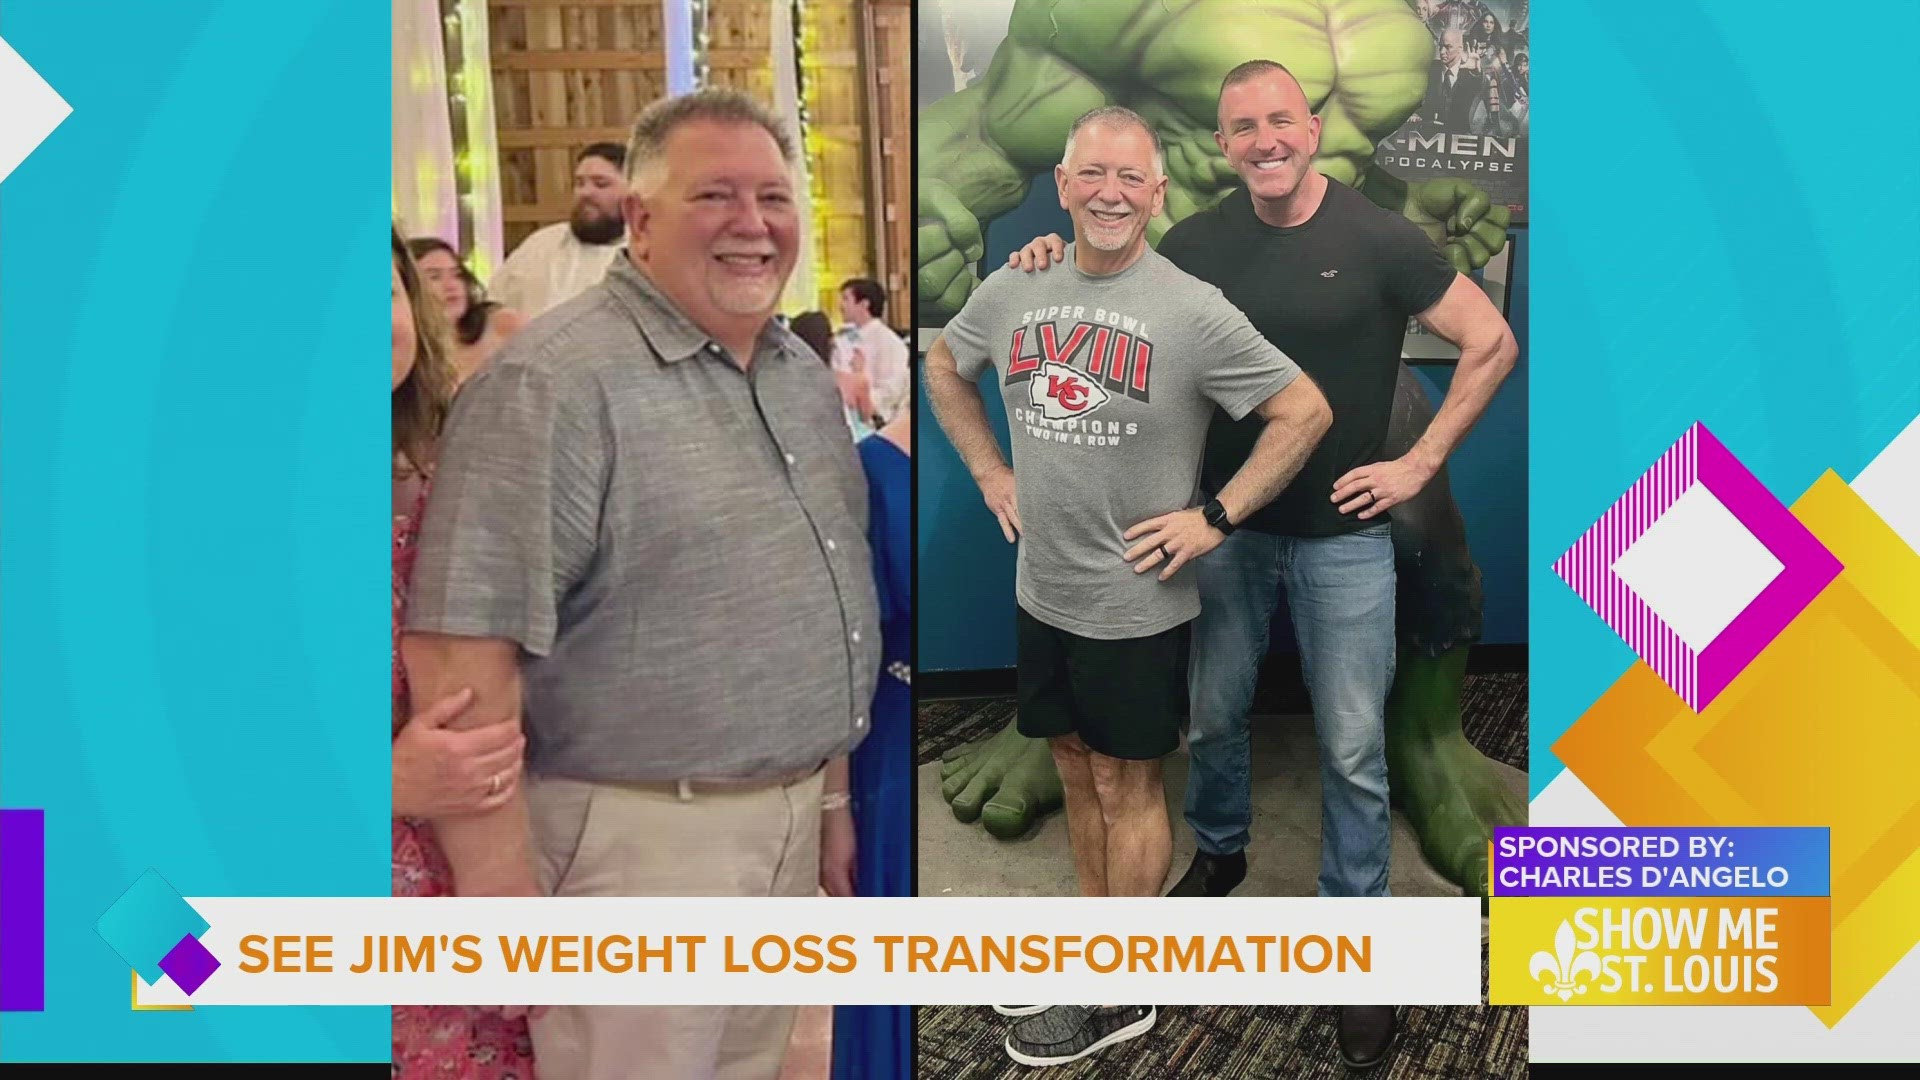 See Jim's weight loss transformation after working with Charles D'Angelo.